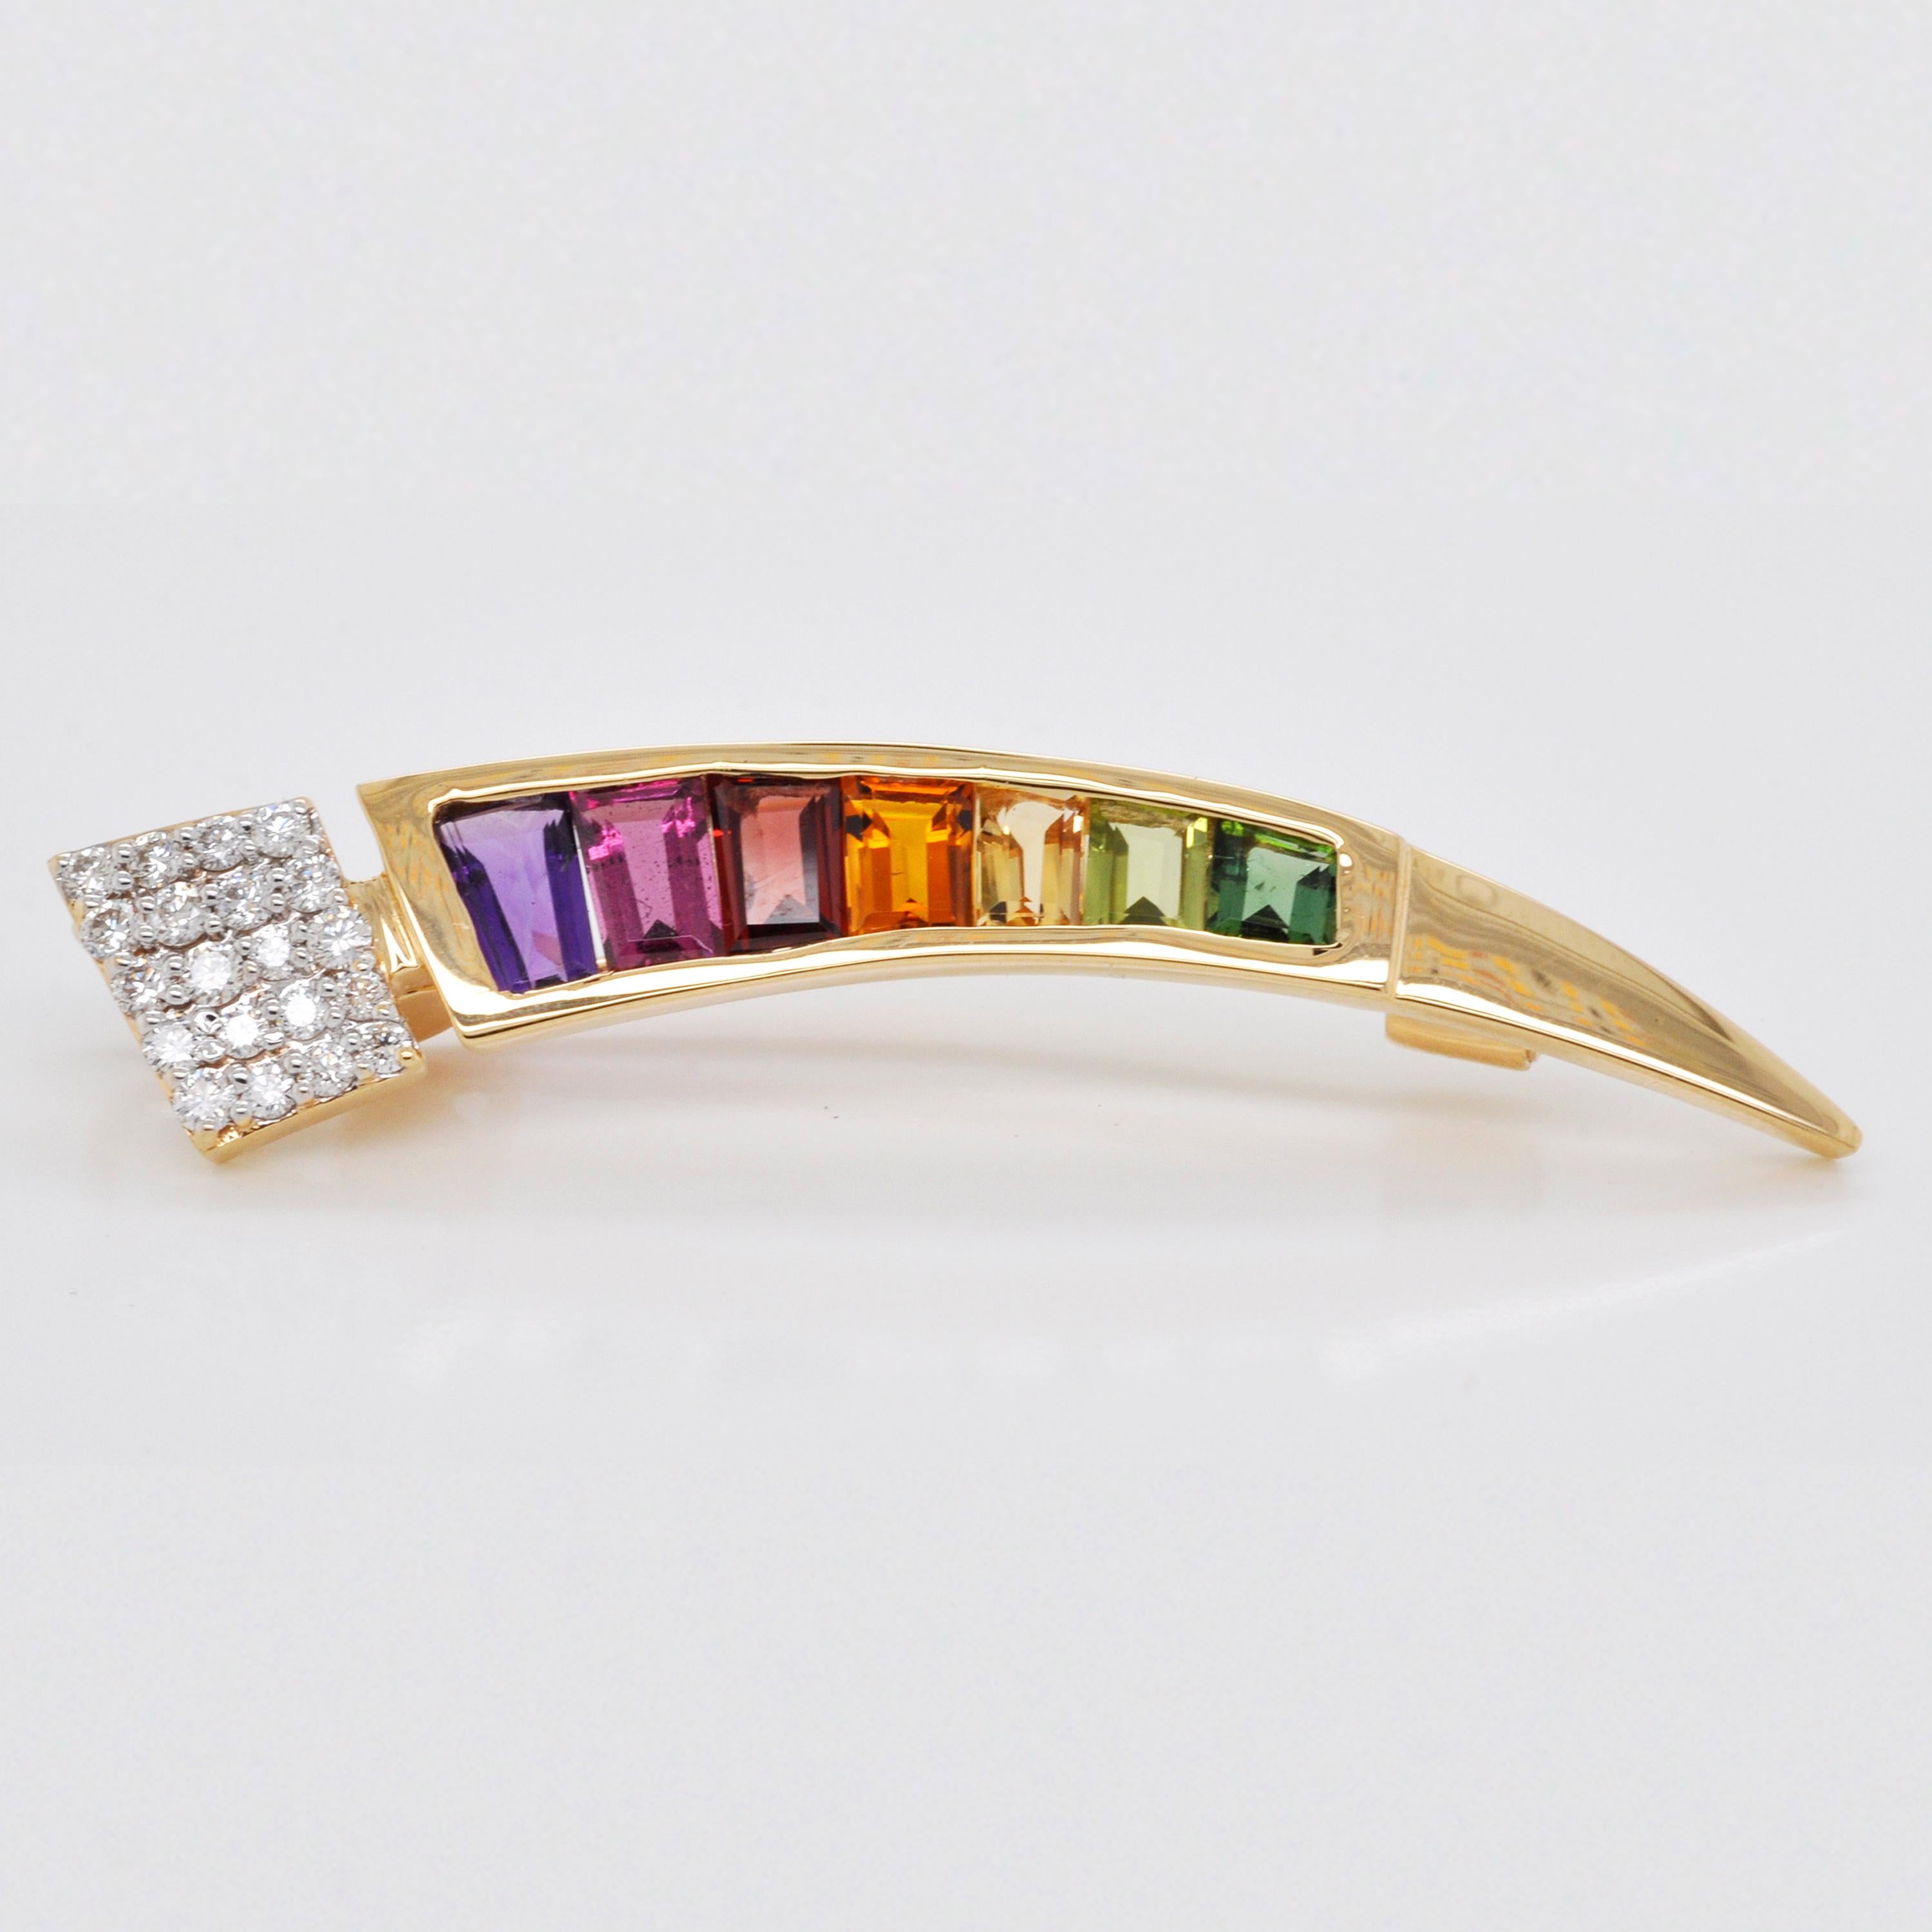 18 Karat Gold Muticolor Rainbow Tapered Baguette Diamond Pendant Brooch In New Condition For Sale In Jaipur, Rajasthan